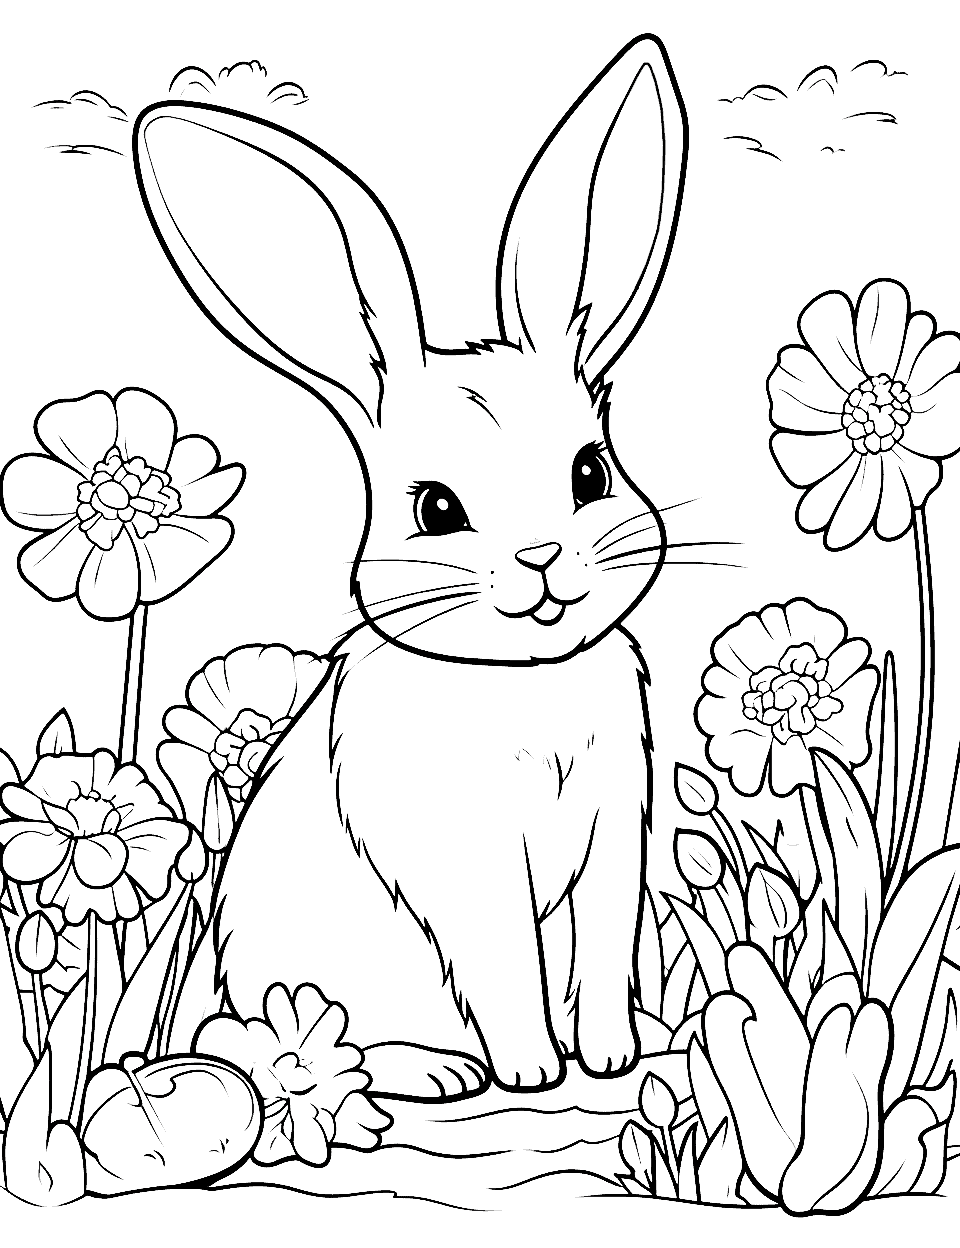 Spring Bunny Among Flowers Coloring Page - A joyful bunny amidst spring flowers like tulips and daffodils.